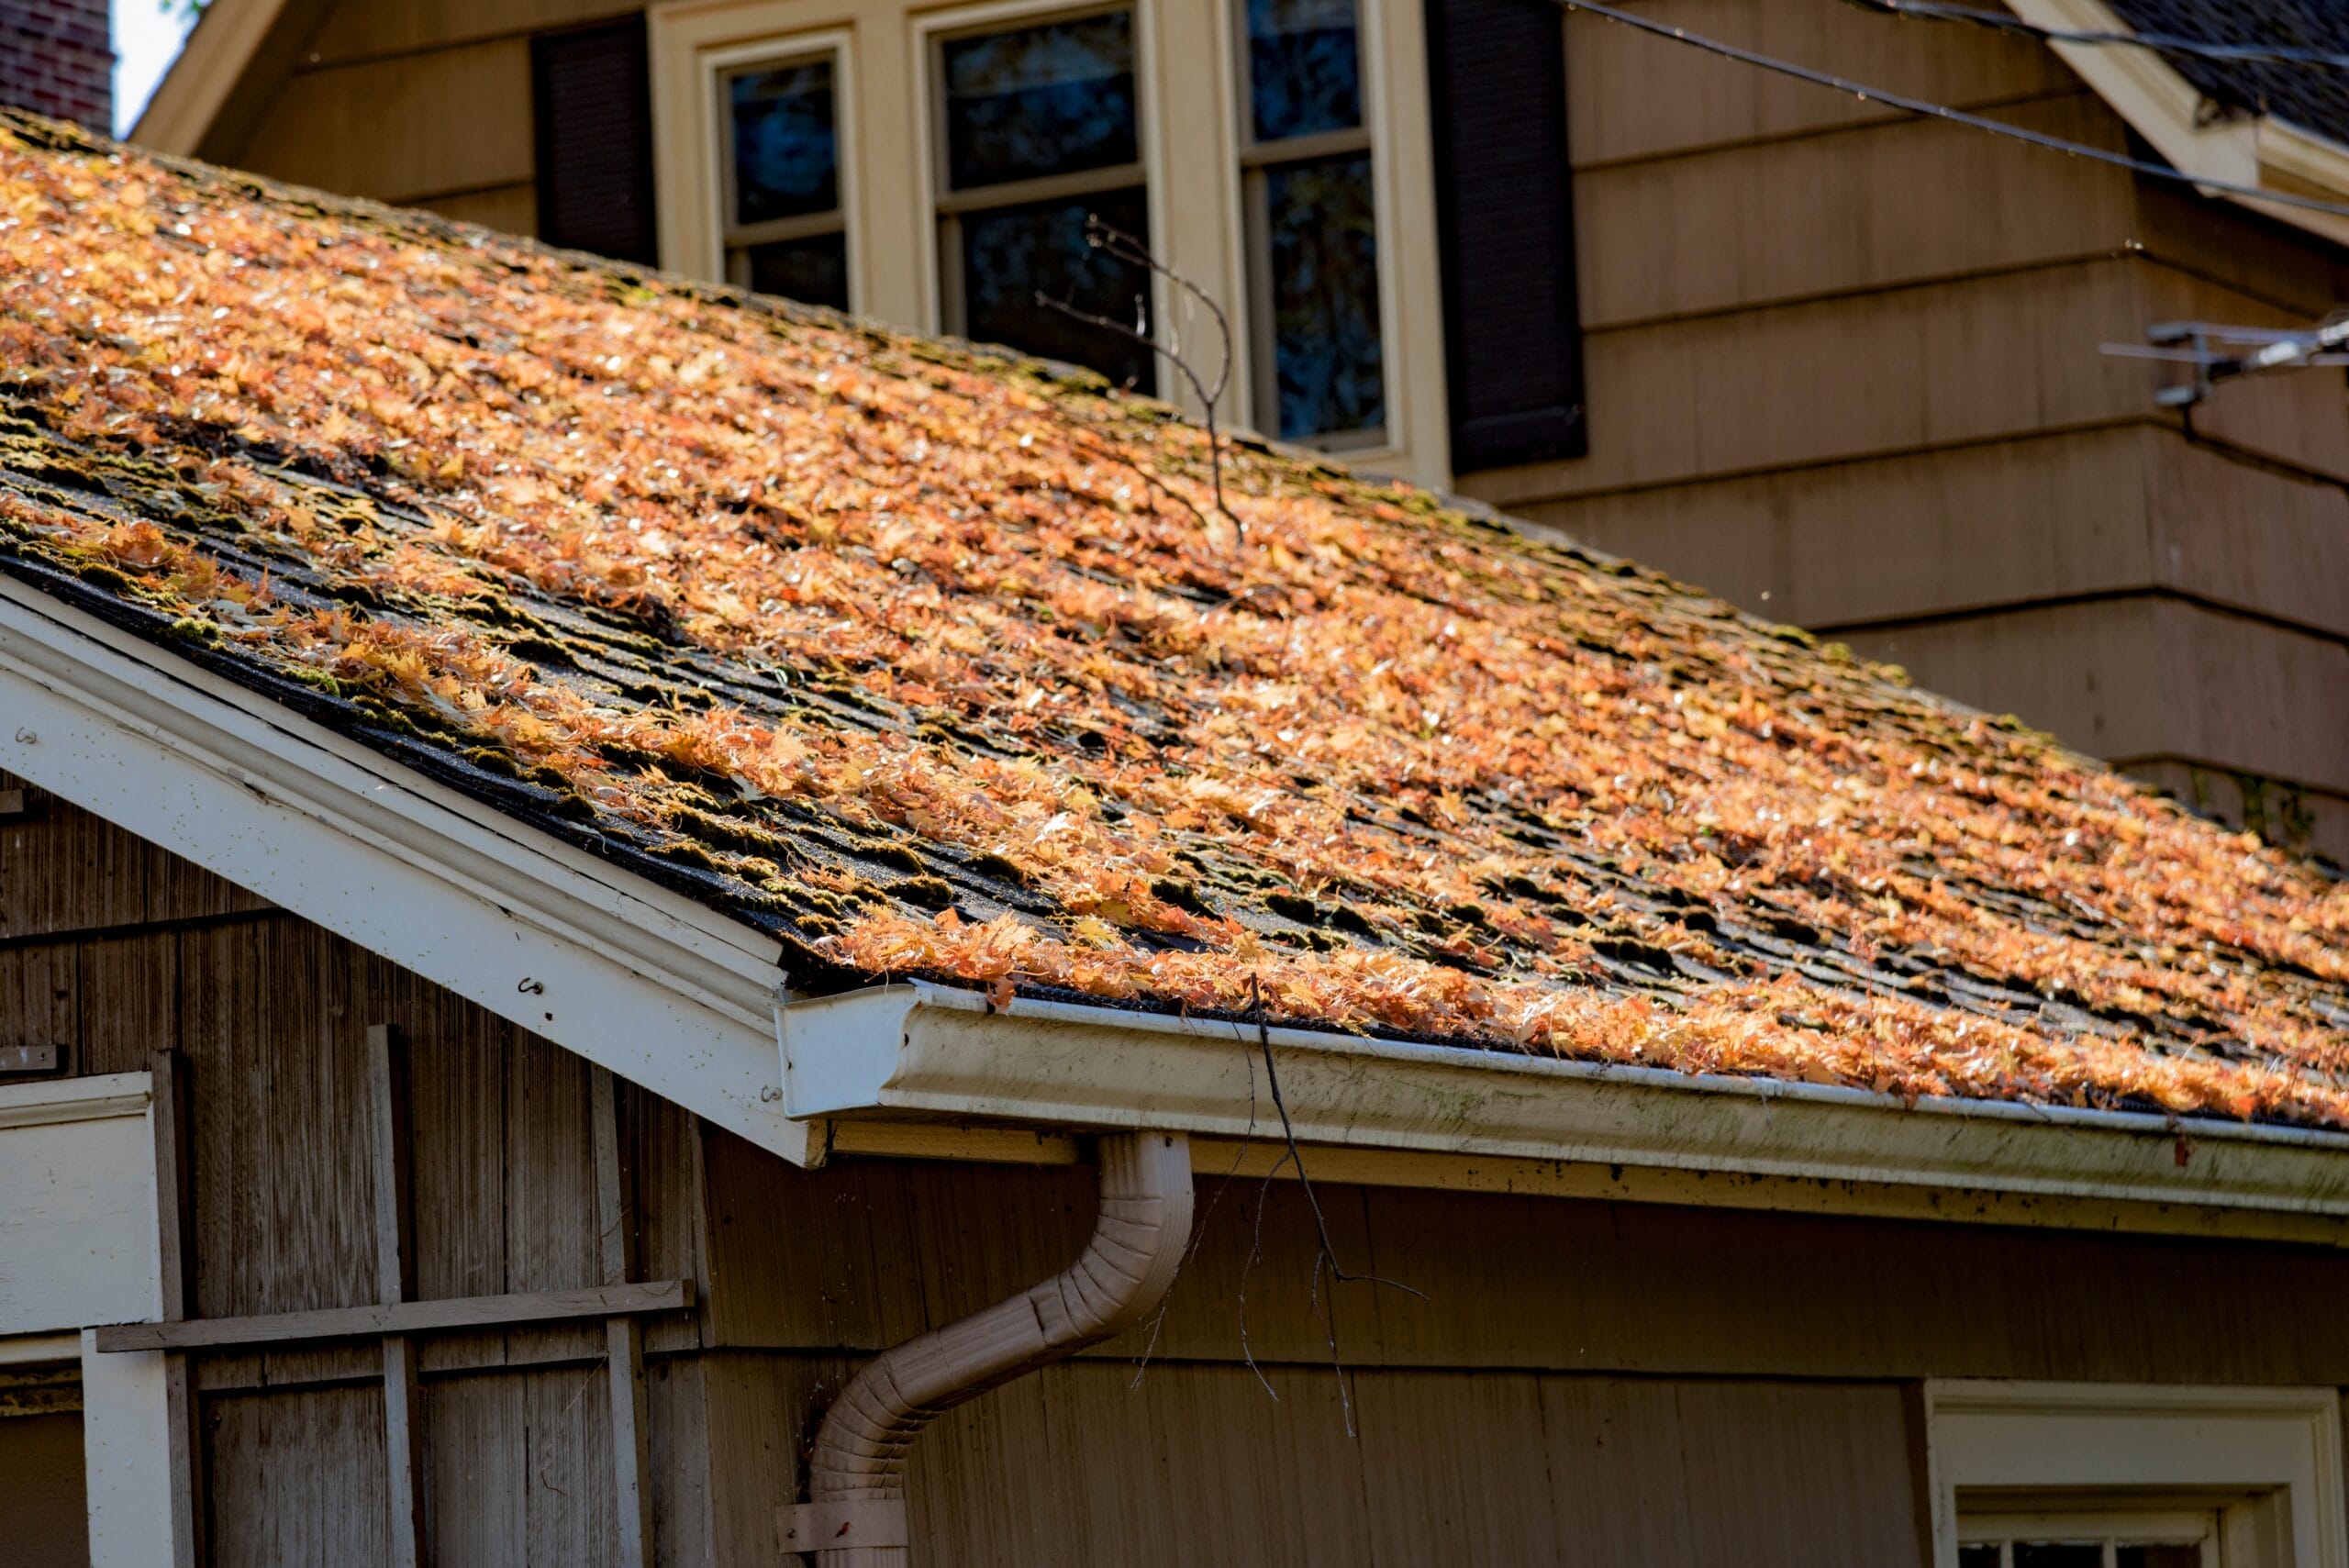 spring roof problems, spring roof damage, roof damage repair, Moline